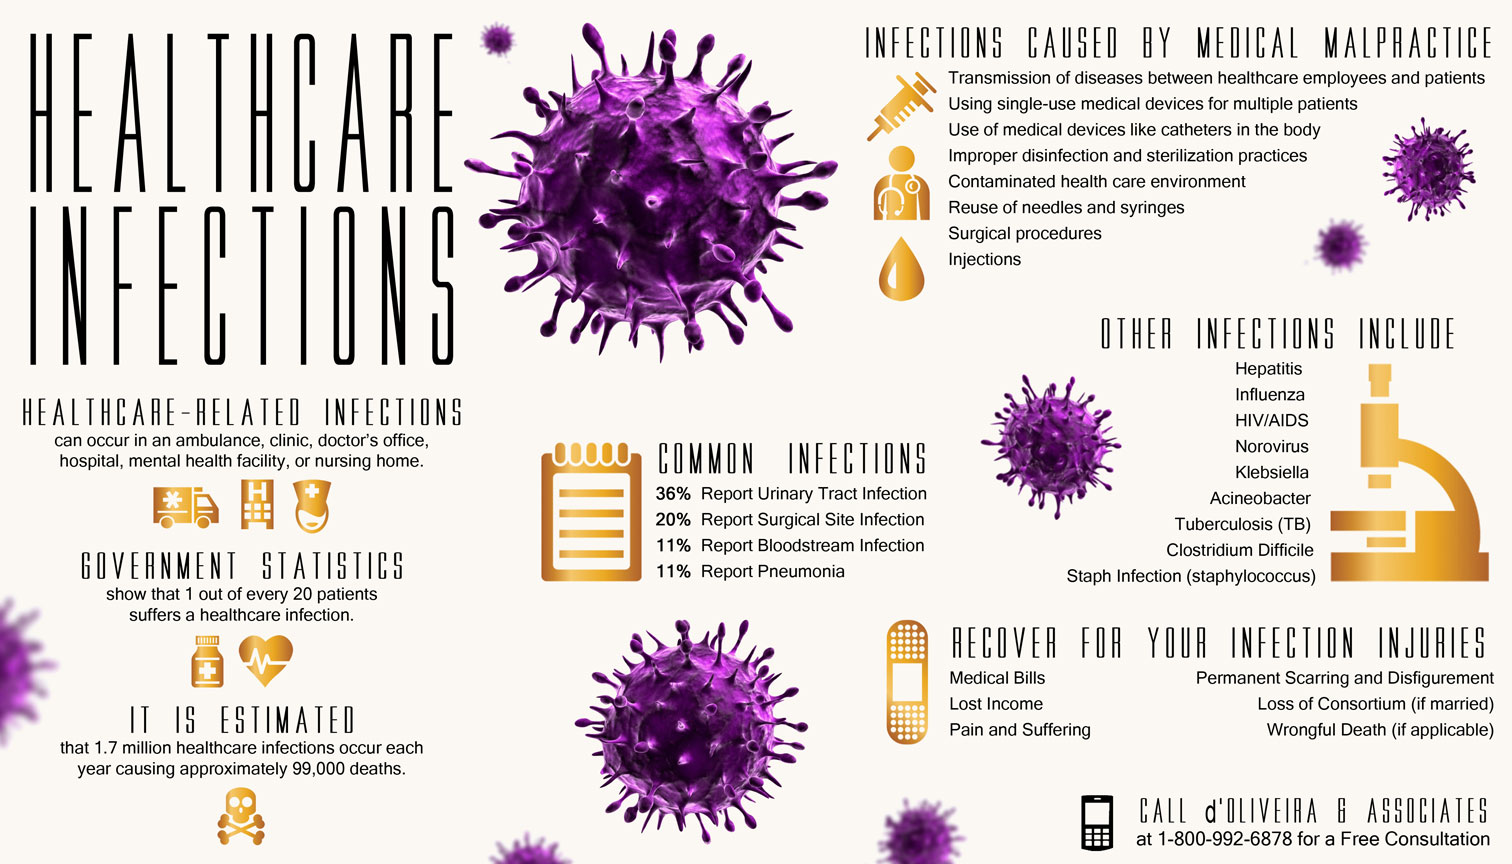 Hospital Infections Infographic with infections caused by Medical Malpractice and other common infections